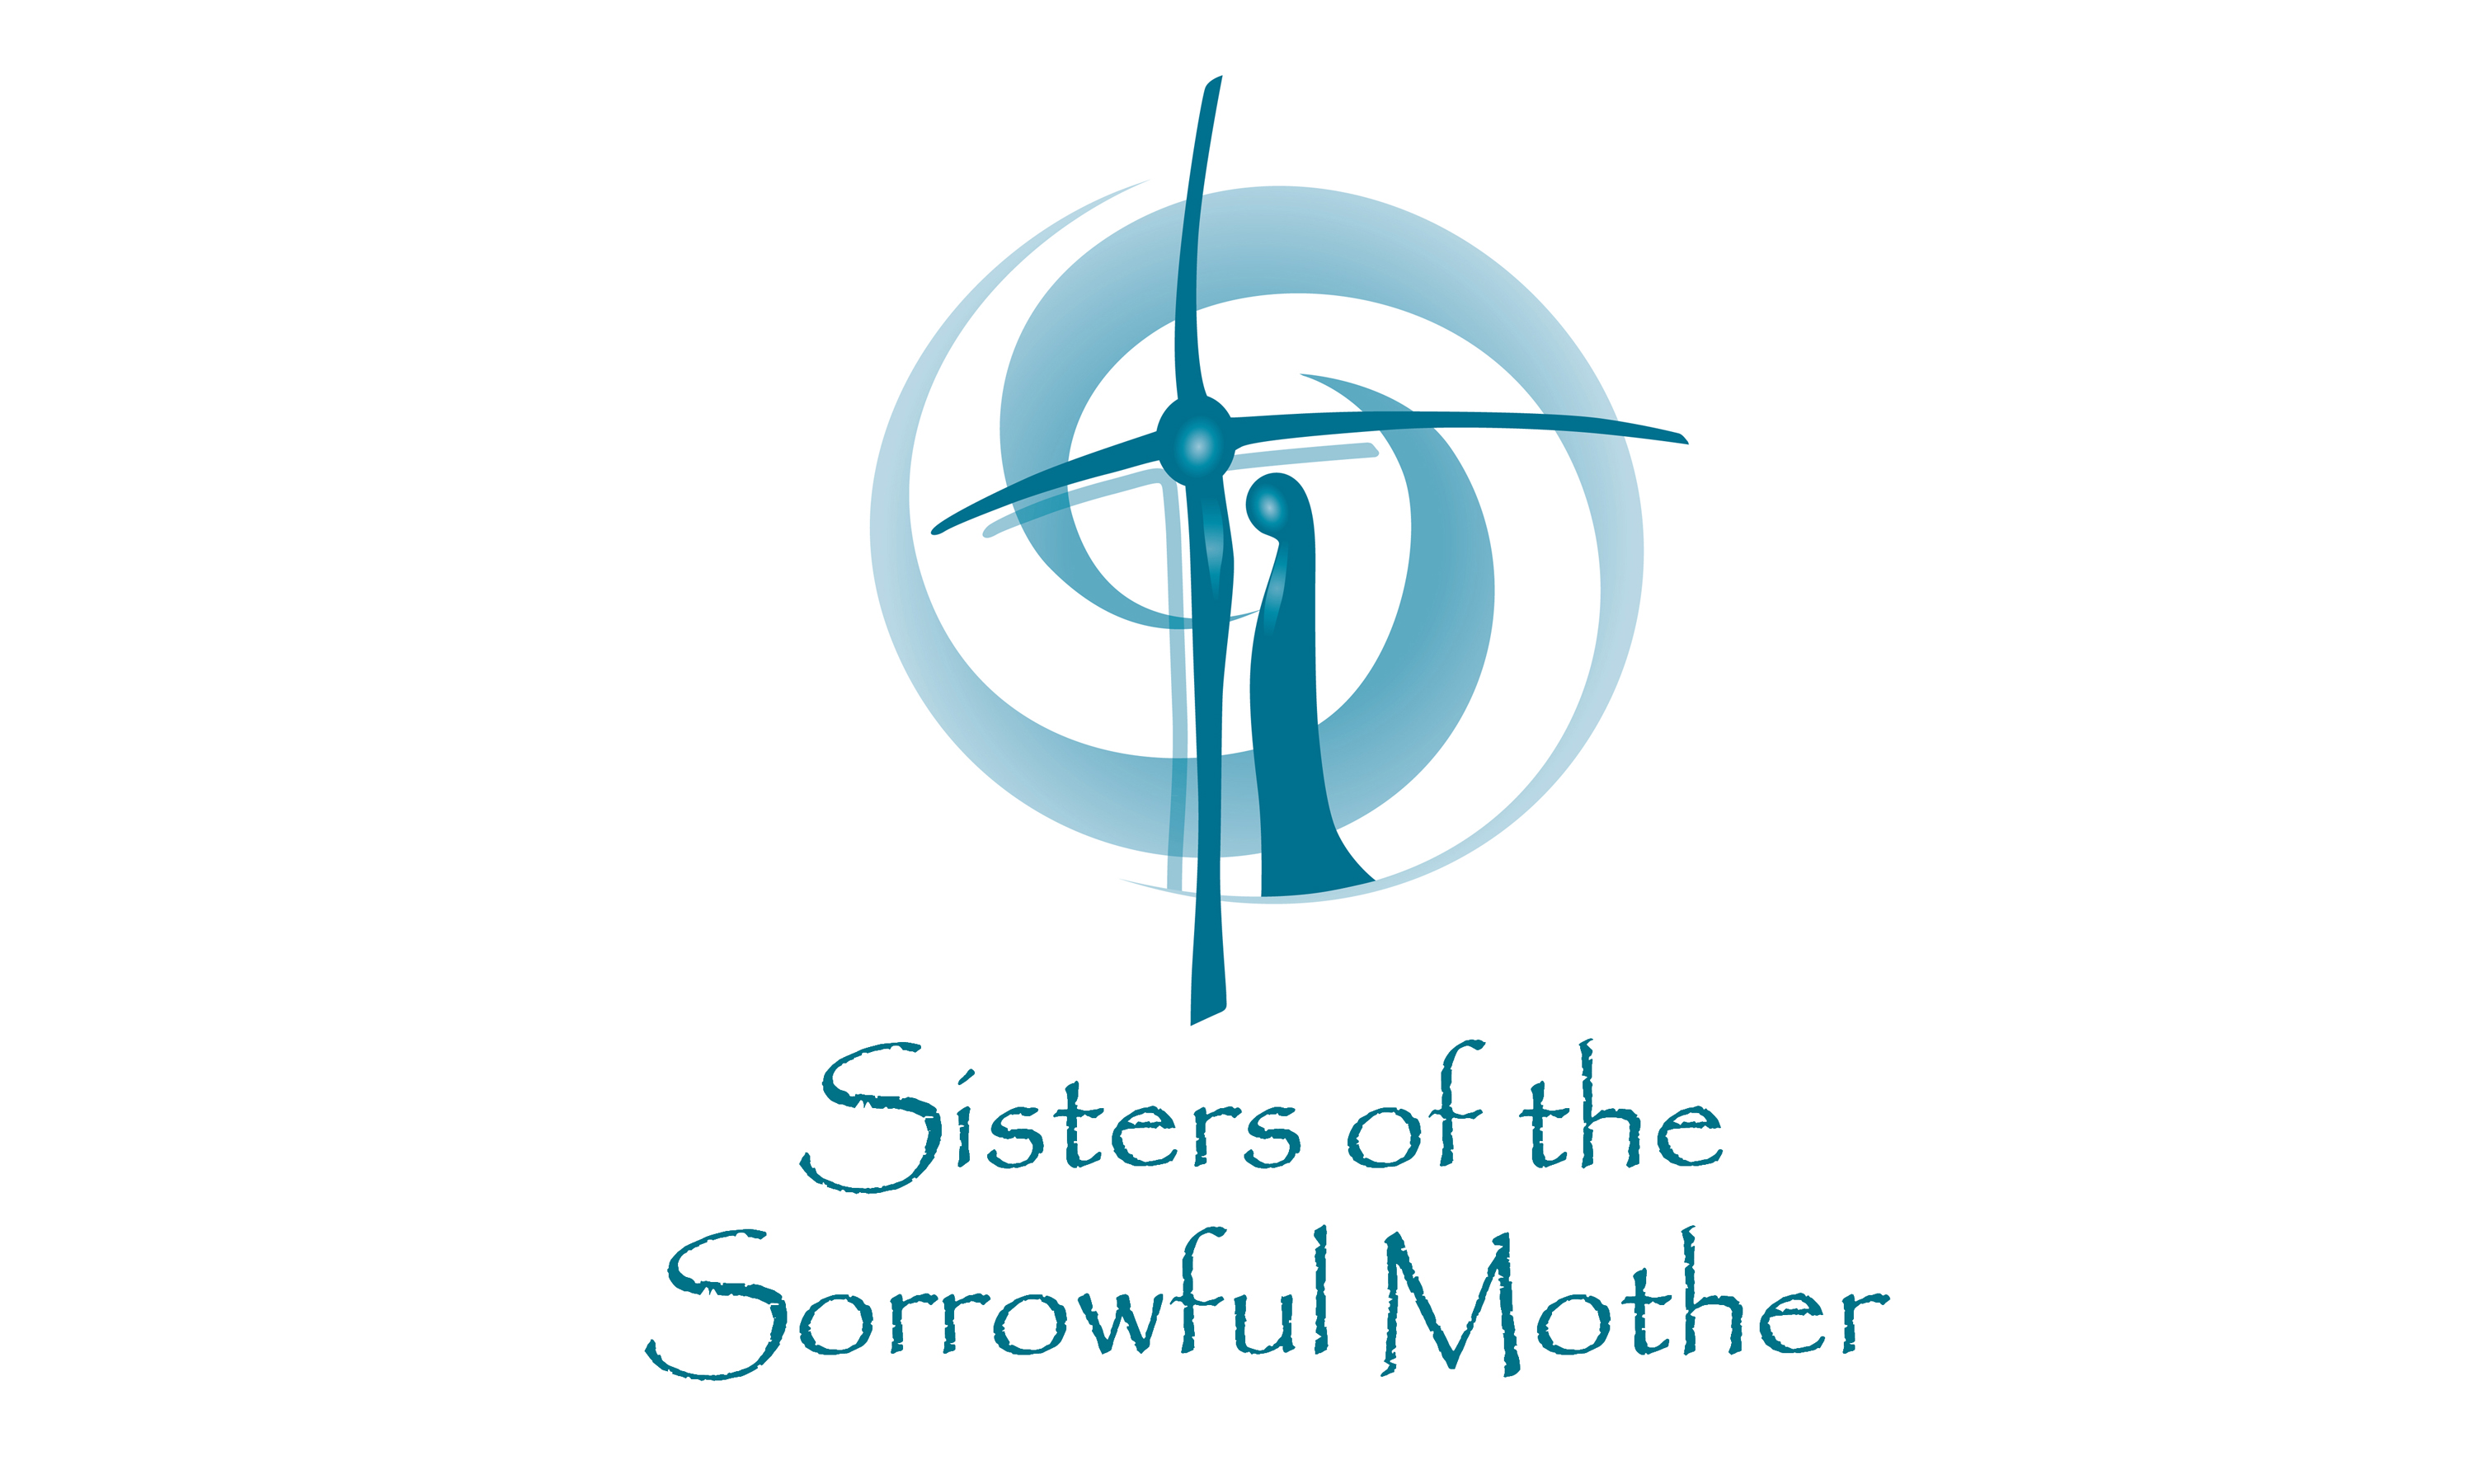 Sisters of the Sorrowful Mother - United States of America